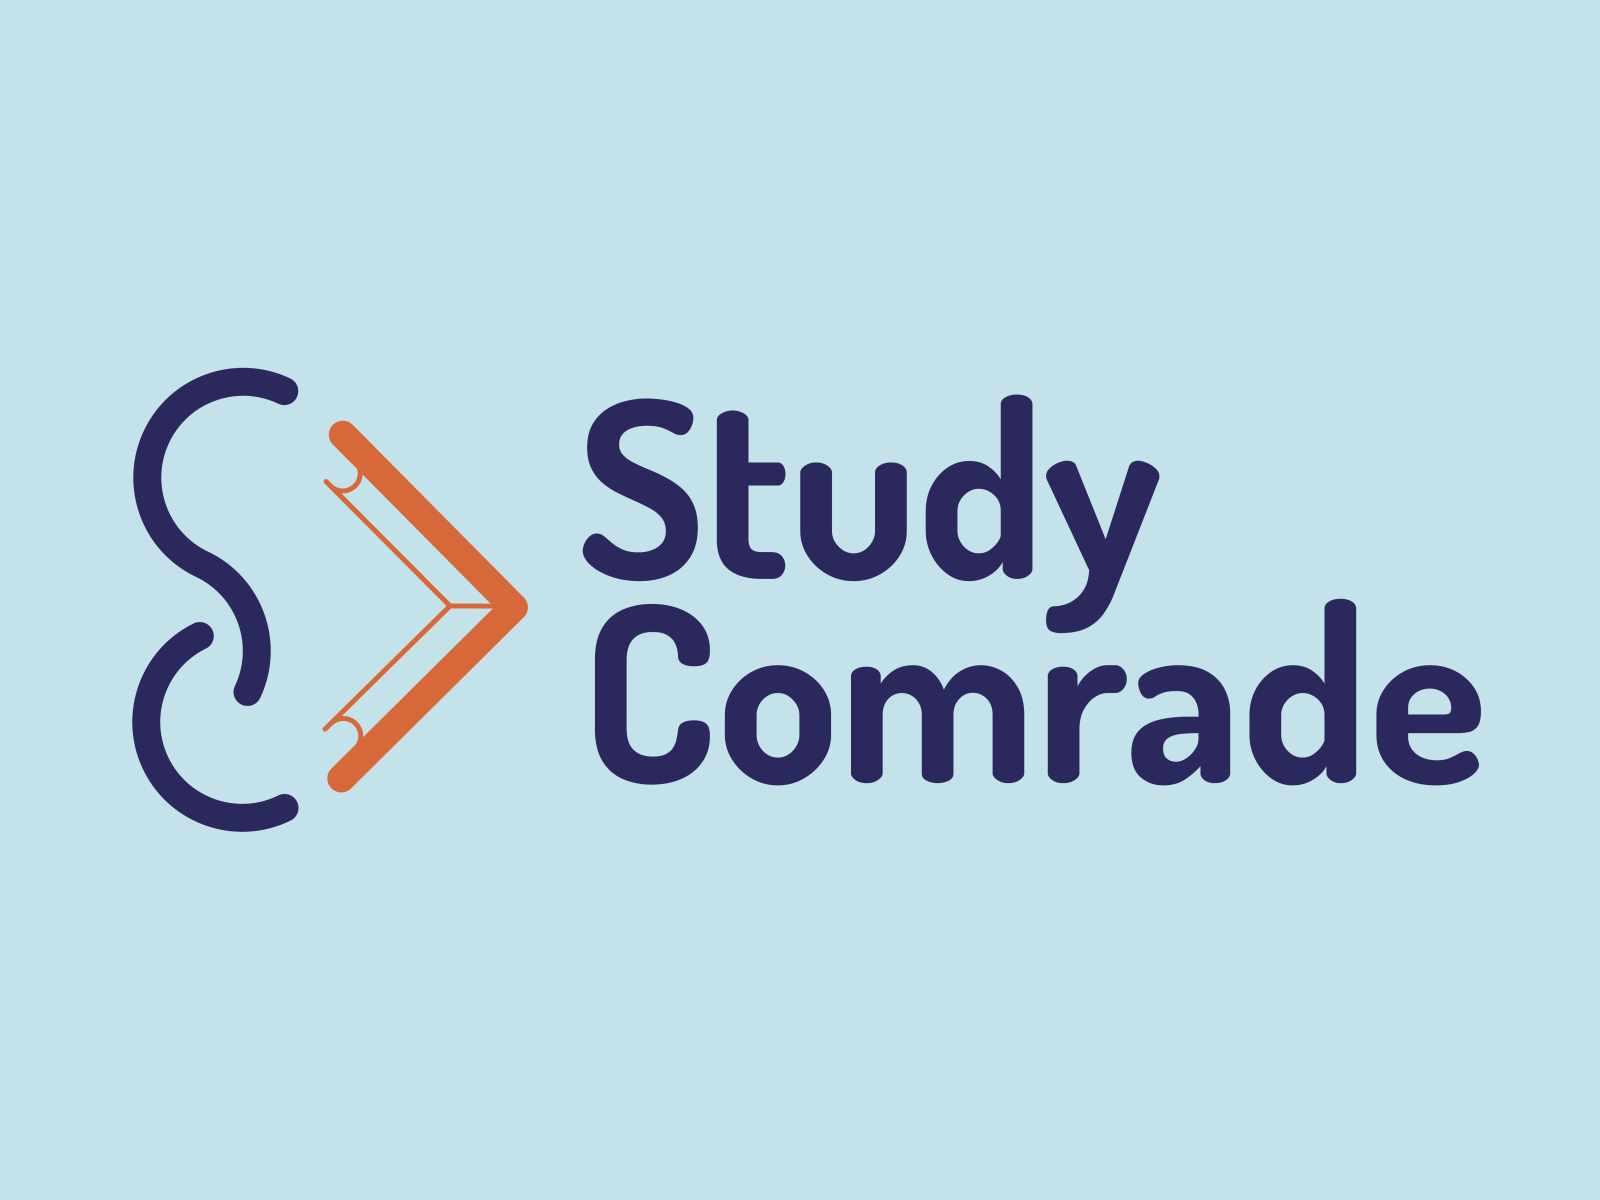 Using https://study.com/images/about-us/media-kit/study-button.png, create  a new logo containing the existing study.com logo and adding on a ms 365  logo with a transparent background on Craiyon